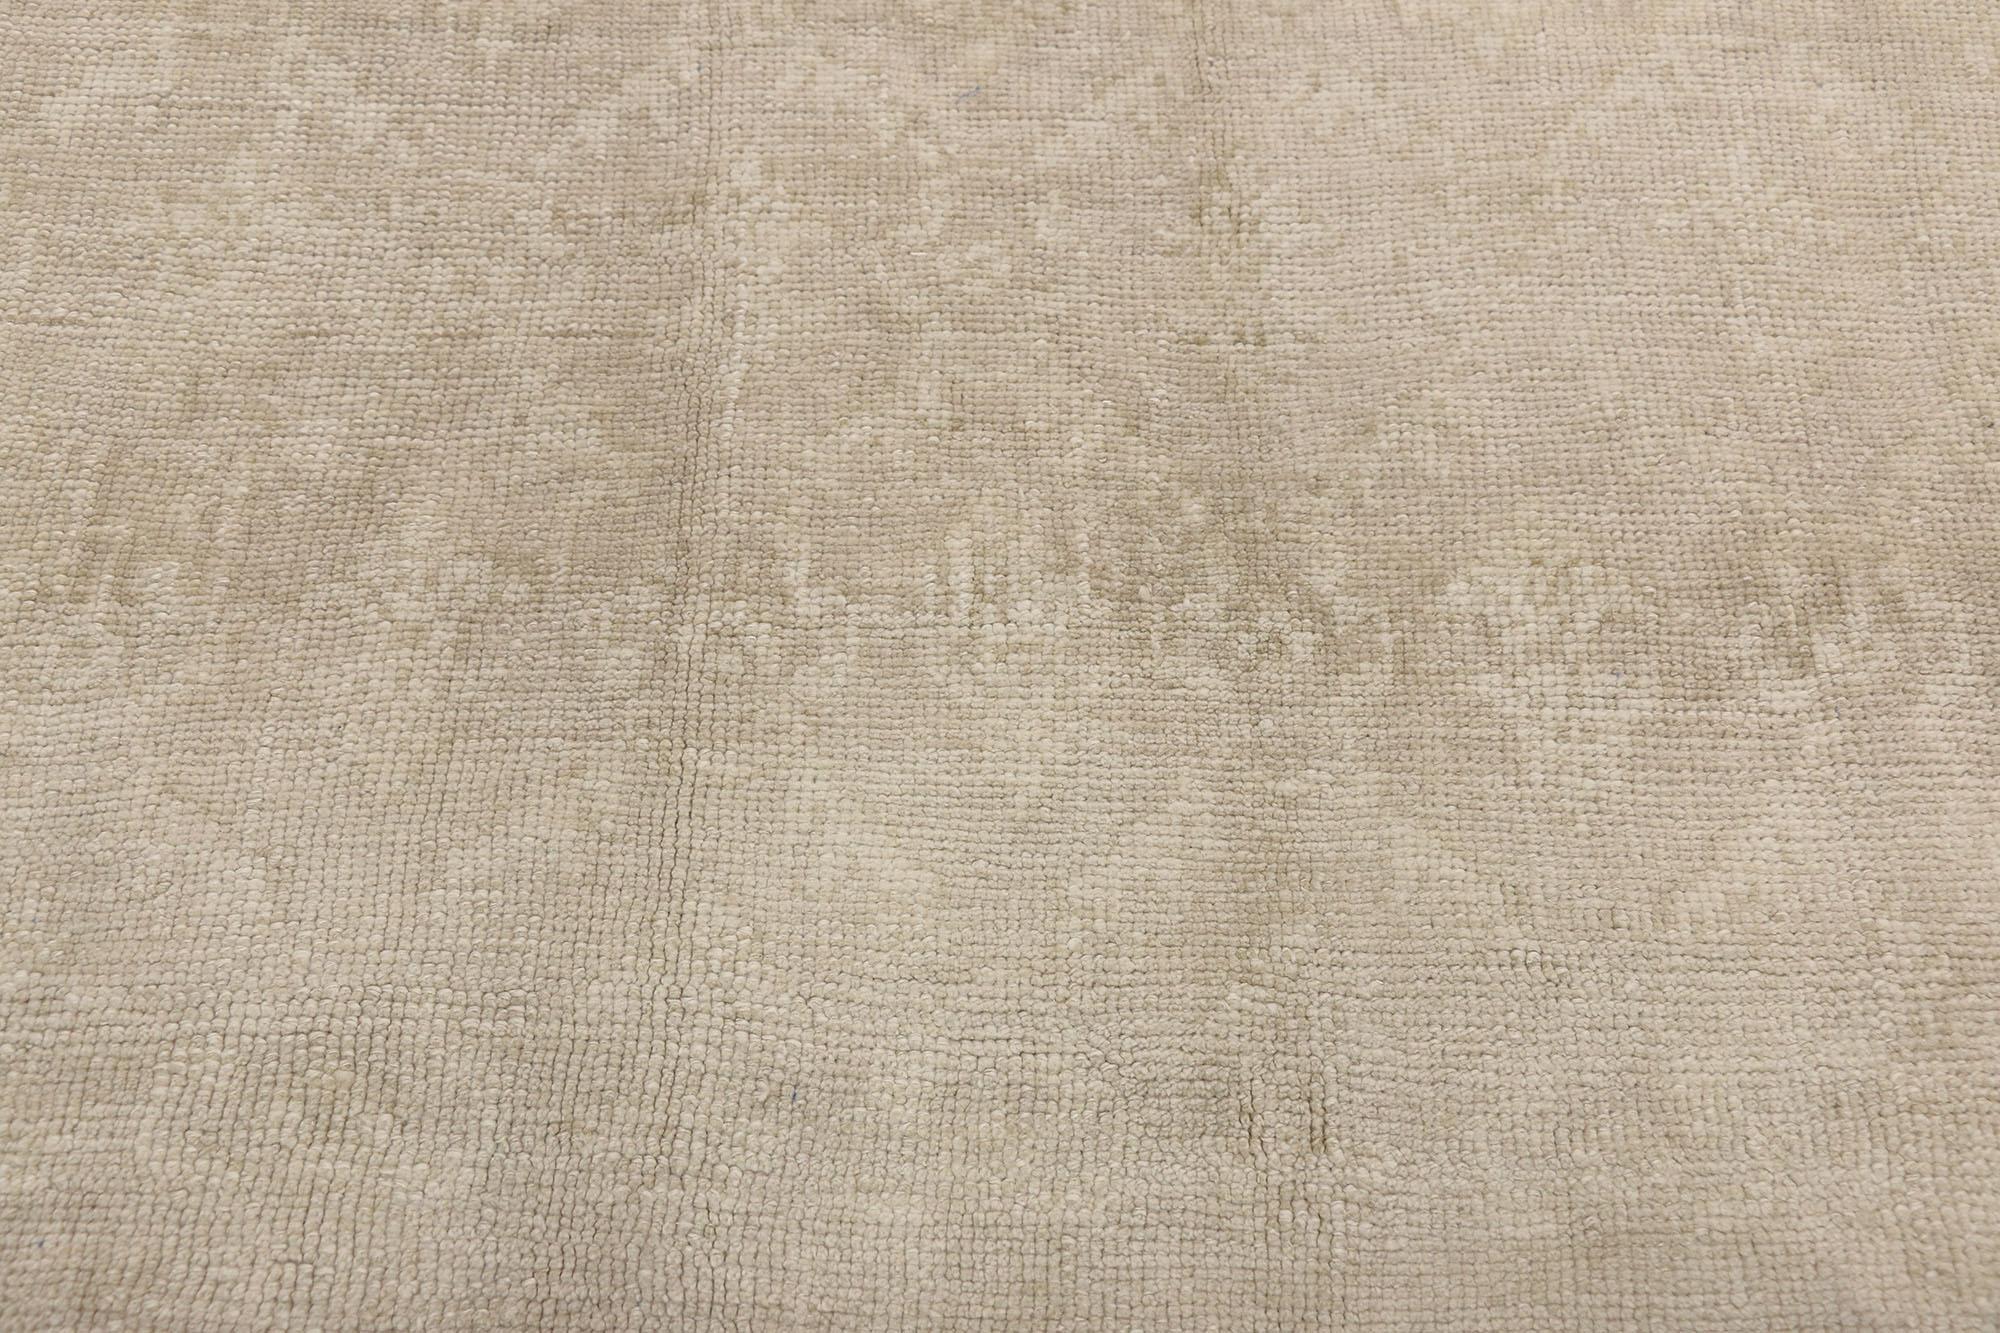 Vintage Turkish Oushak Rug with Shaker Style and Neutral Colors In Good Condition For Sale In Dallas, TX